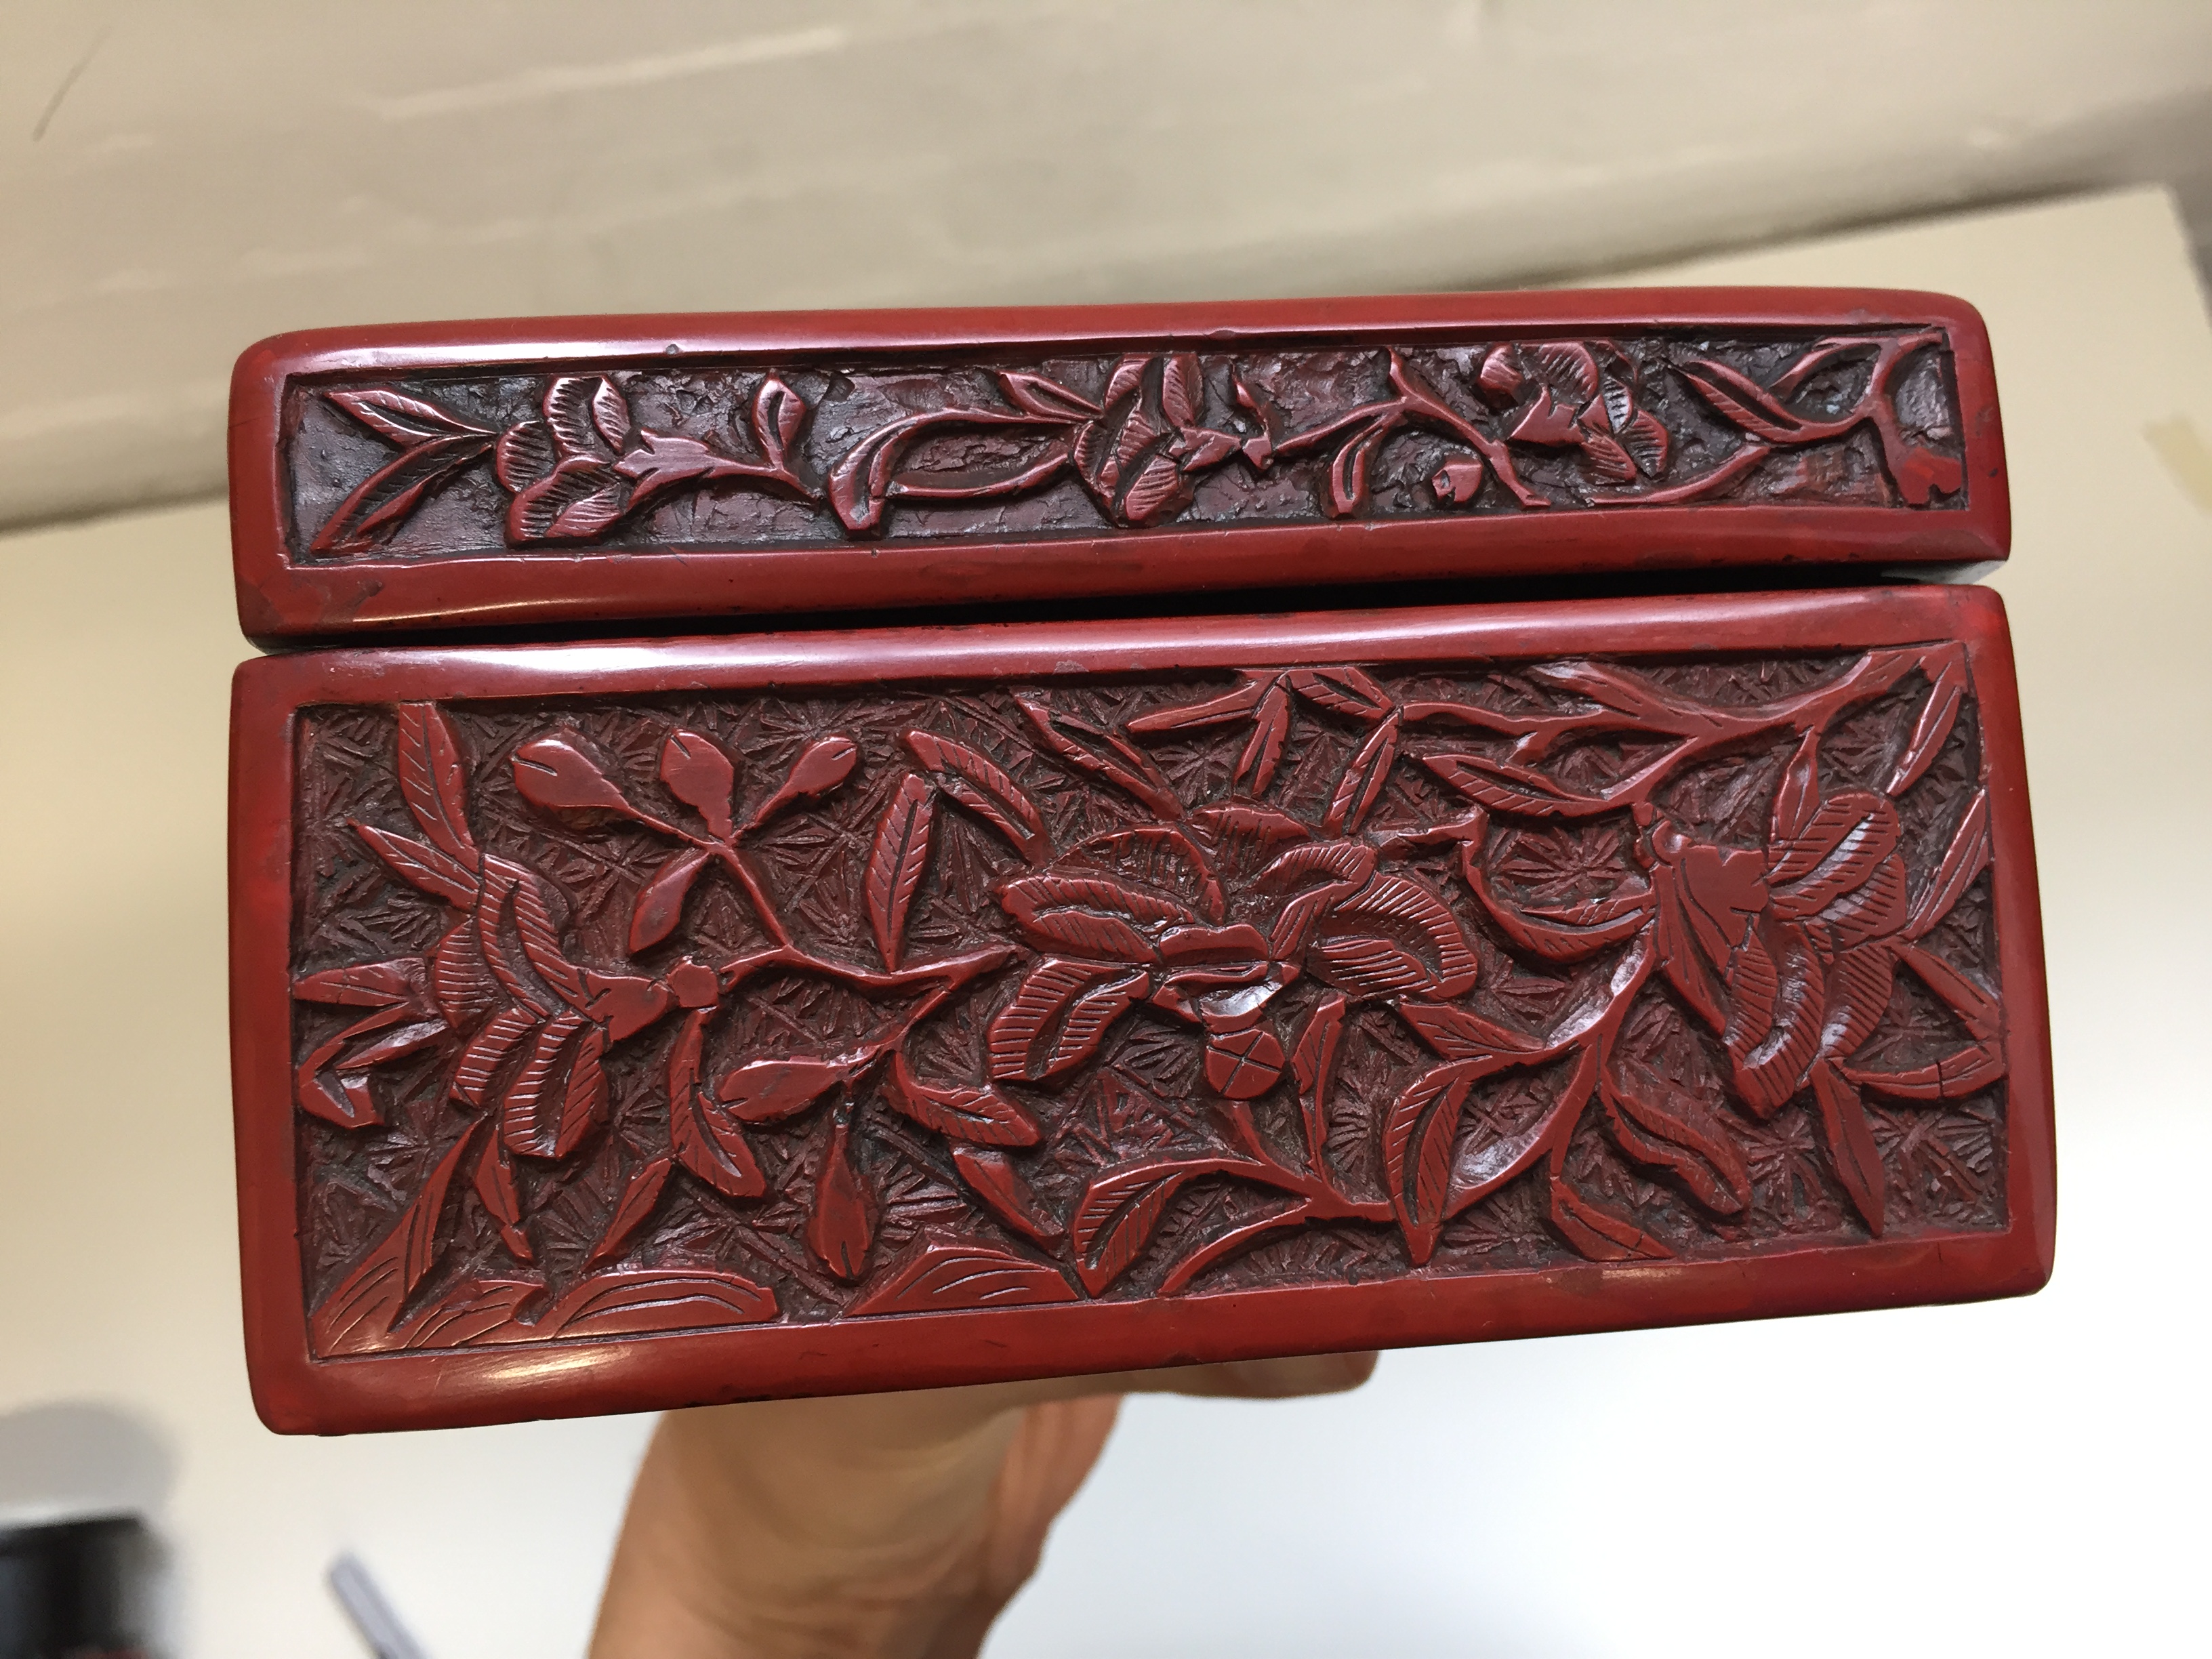 A CHINESE CINNABAR LACQUER 'MUSICIAN' BOX AND COVER 晚明 剔紅圖高士行樂圖紋蓋盒 - Image 10 of 20